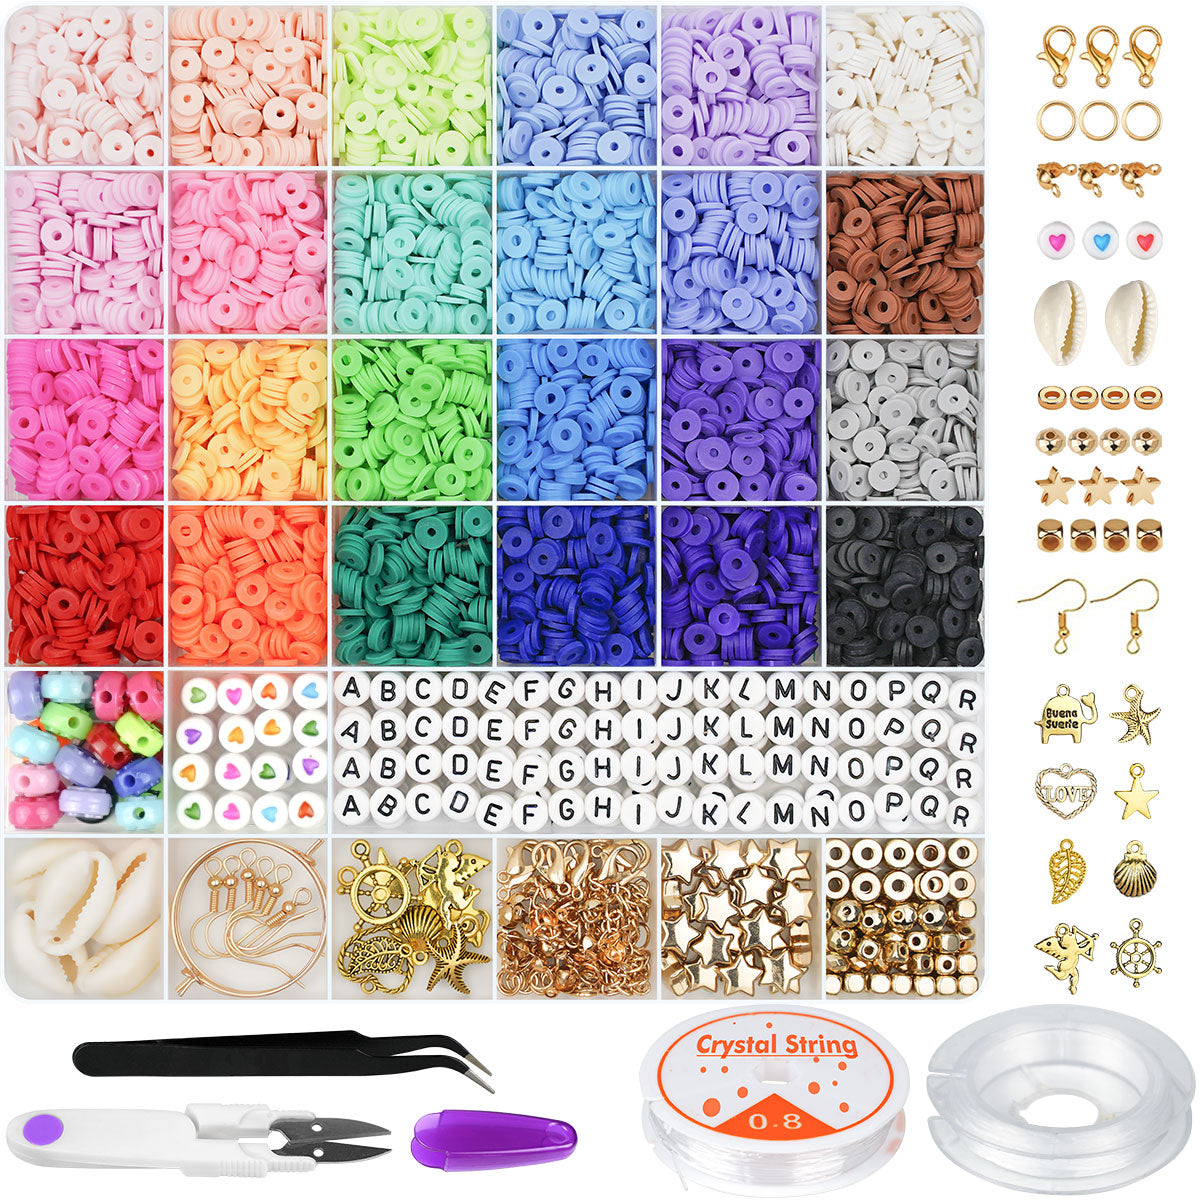 Gionlion 6000 Pcs Clay Beads for Bracelet Making, 24 Colors Flat Round  Polymer Clay Beads 6mm Spacer Heishi Beads with Pendant Charms Kit and  Elastic Strings for Jewelry Making Kit Bracelets Necklace